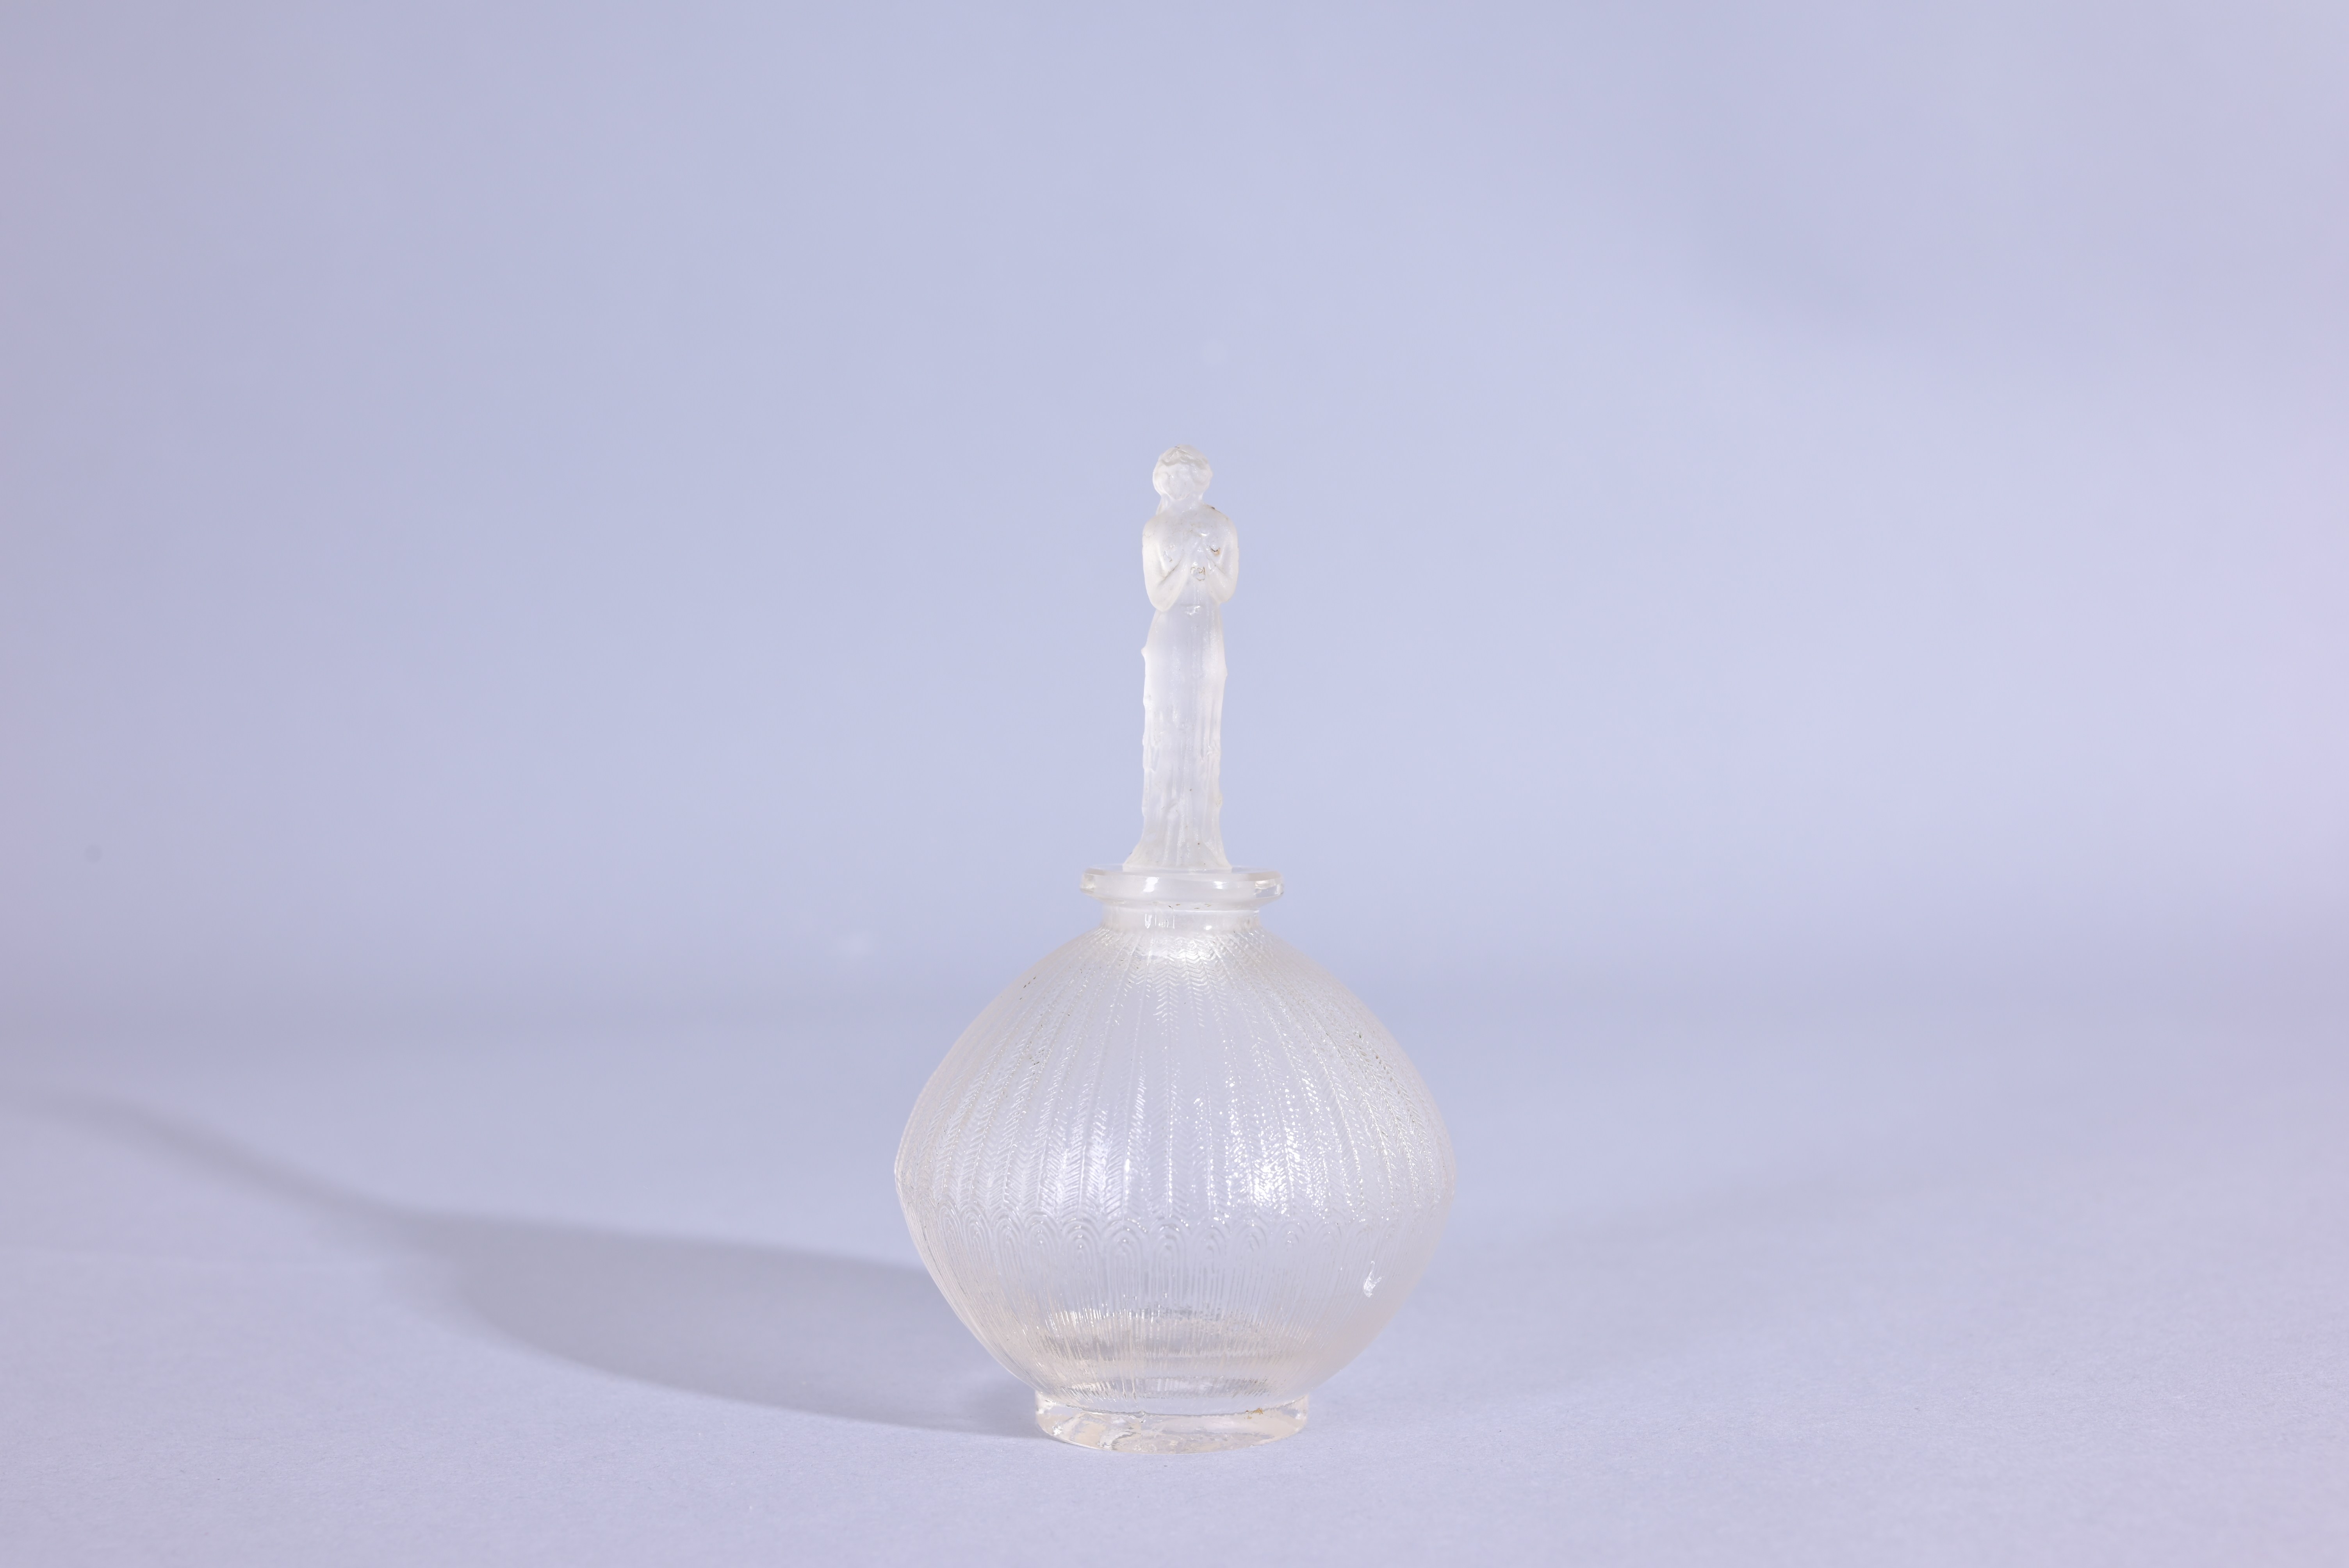 Rene Lalique "Roses" Perfume Bottle for D'Orsay - Image 2 of 7